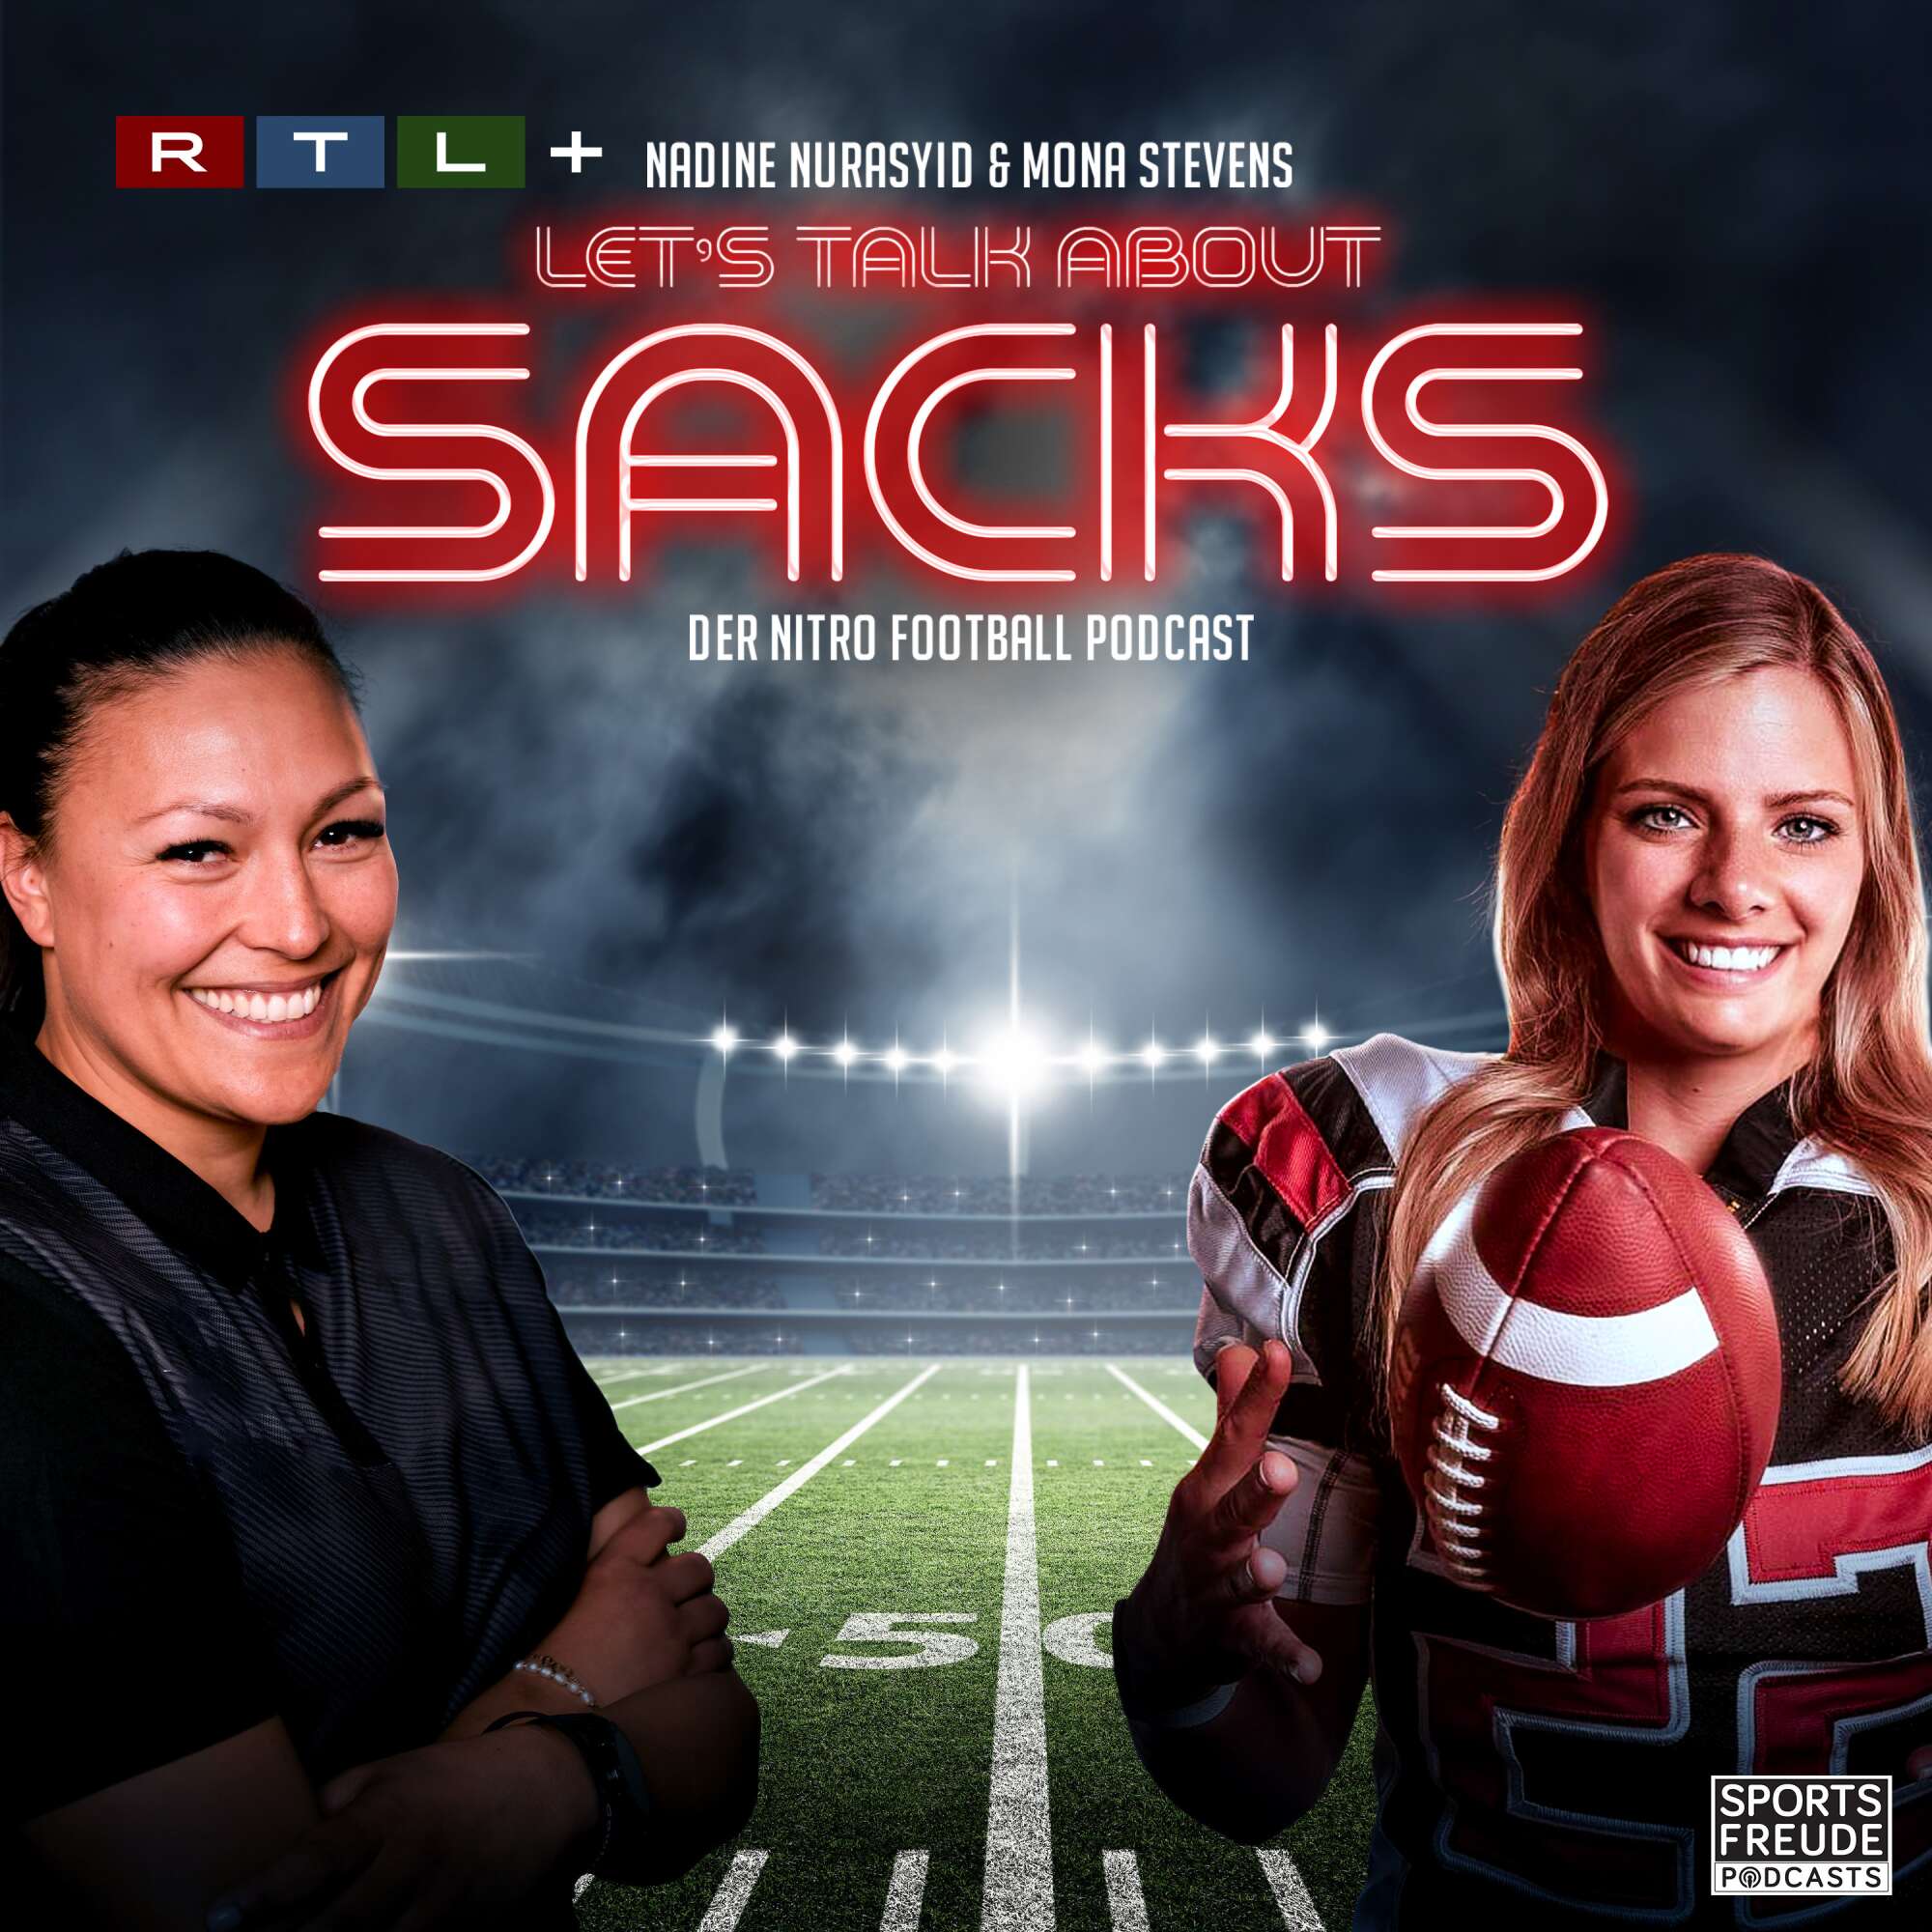 Podcast-Cover "Let´s talk about Sacks"